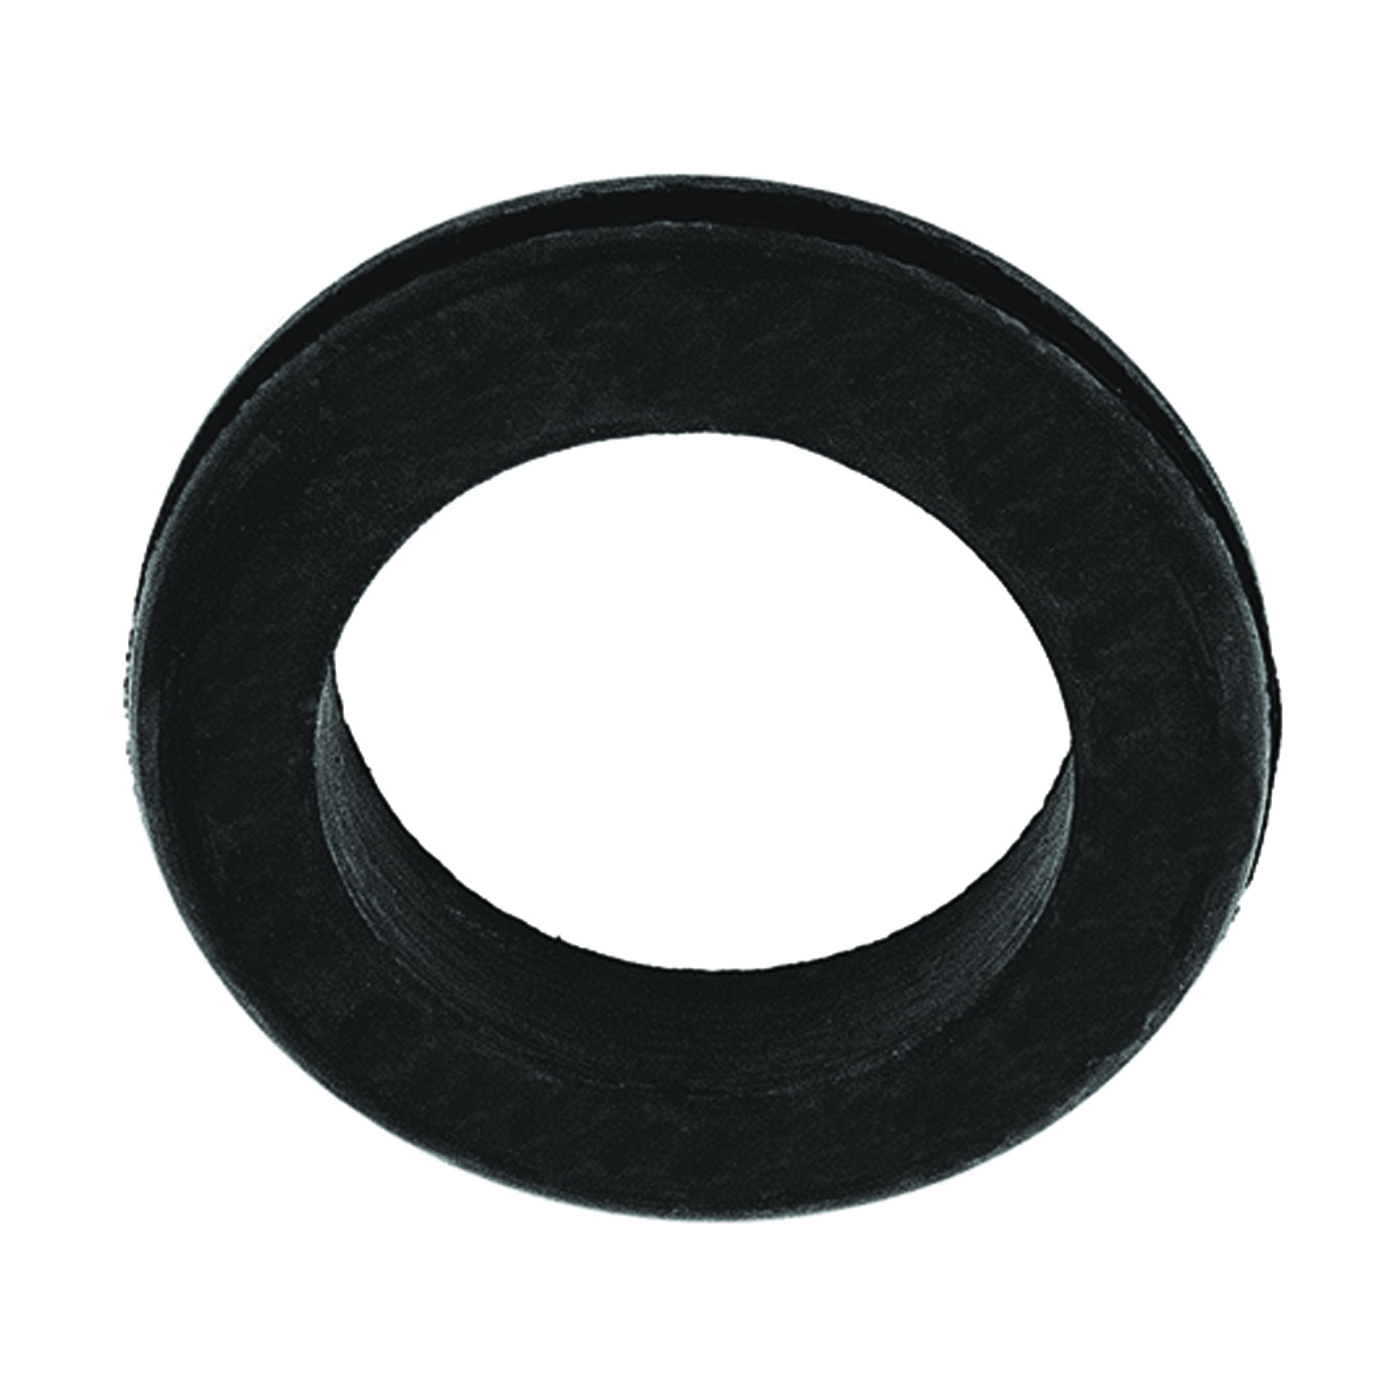 61491 Grommet, Rubber, Black, 3/8 in Thick Panel